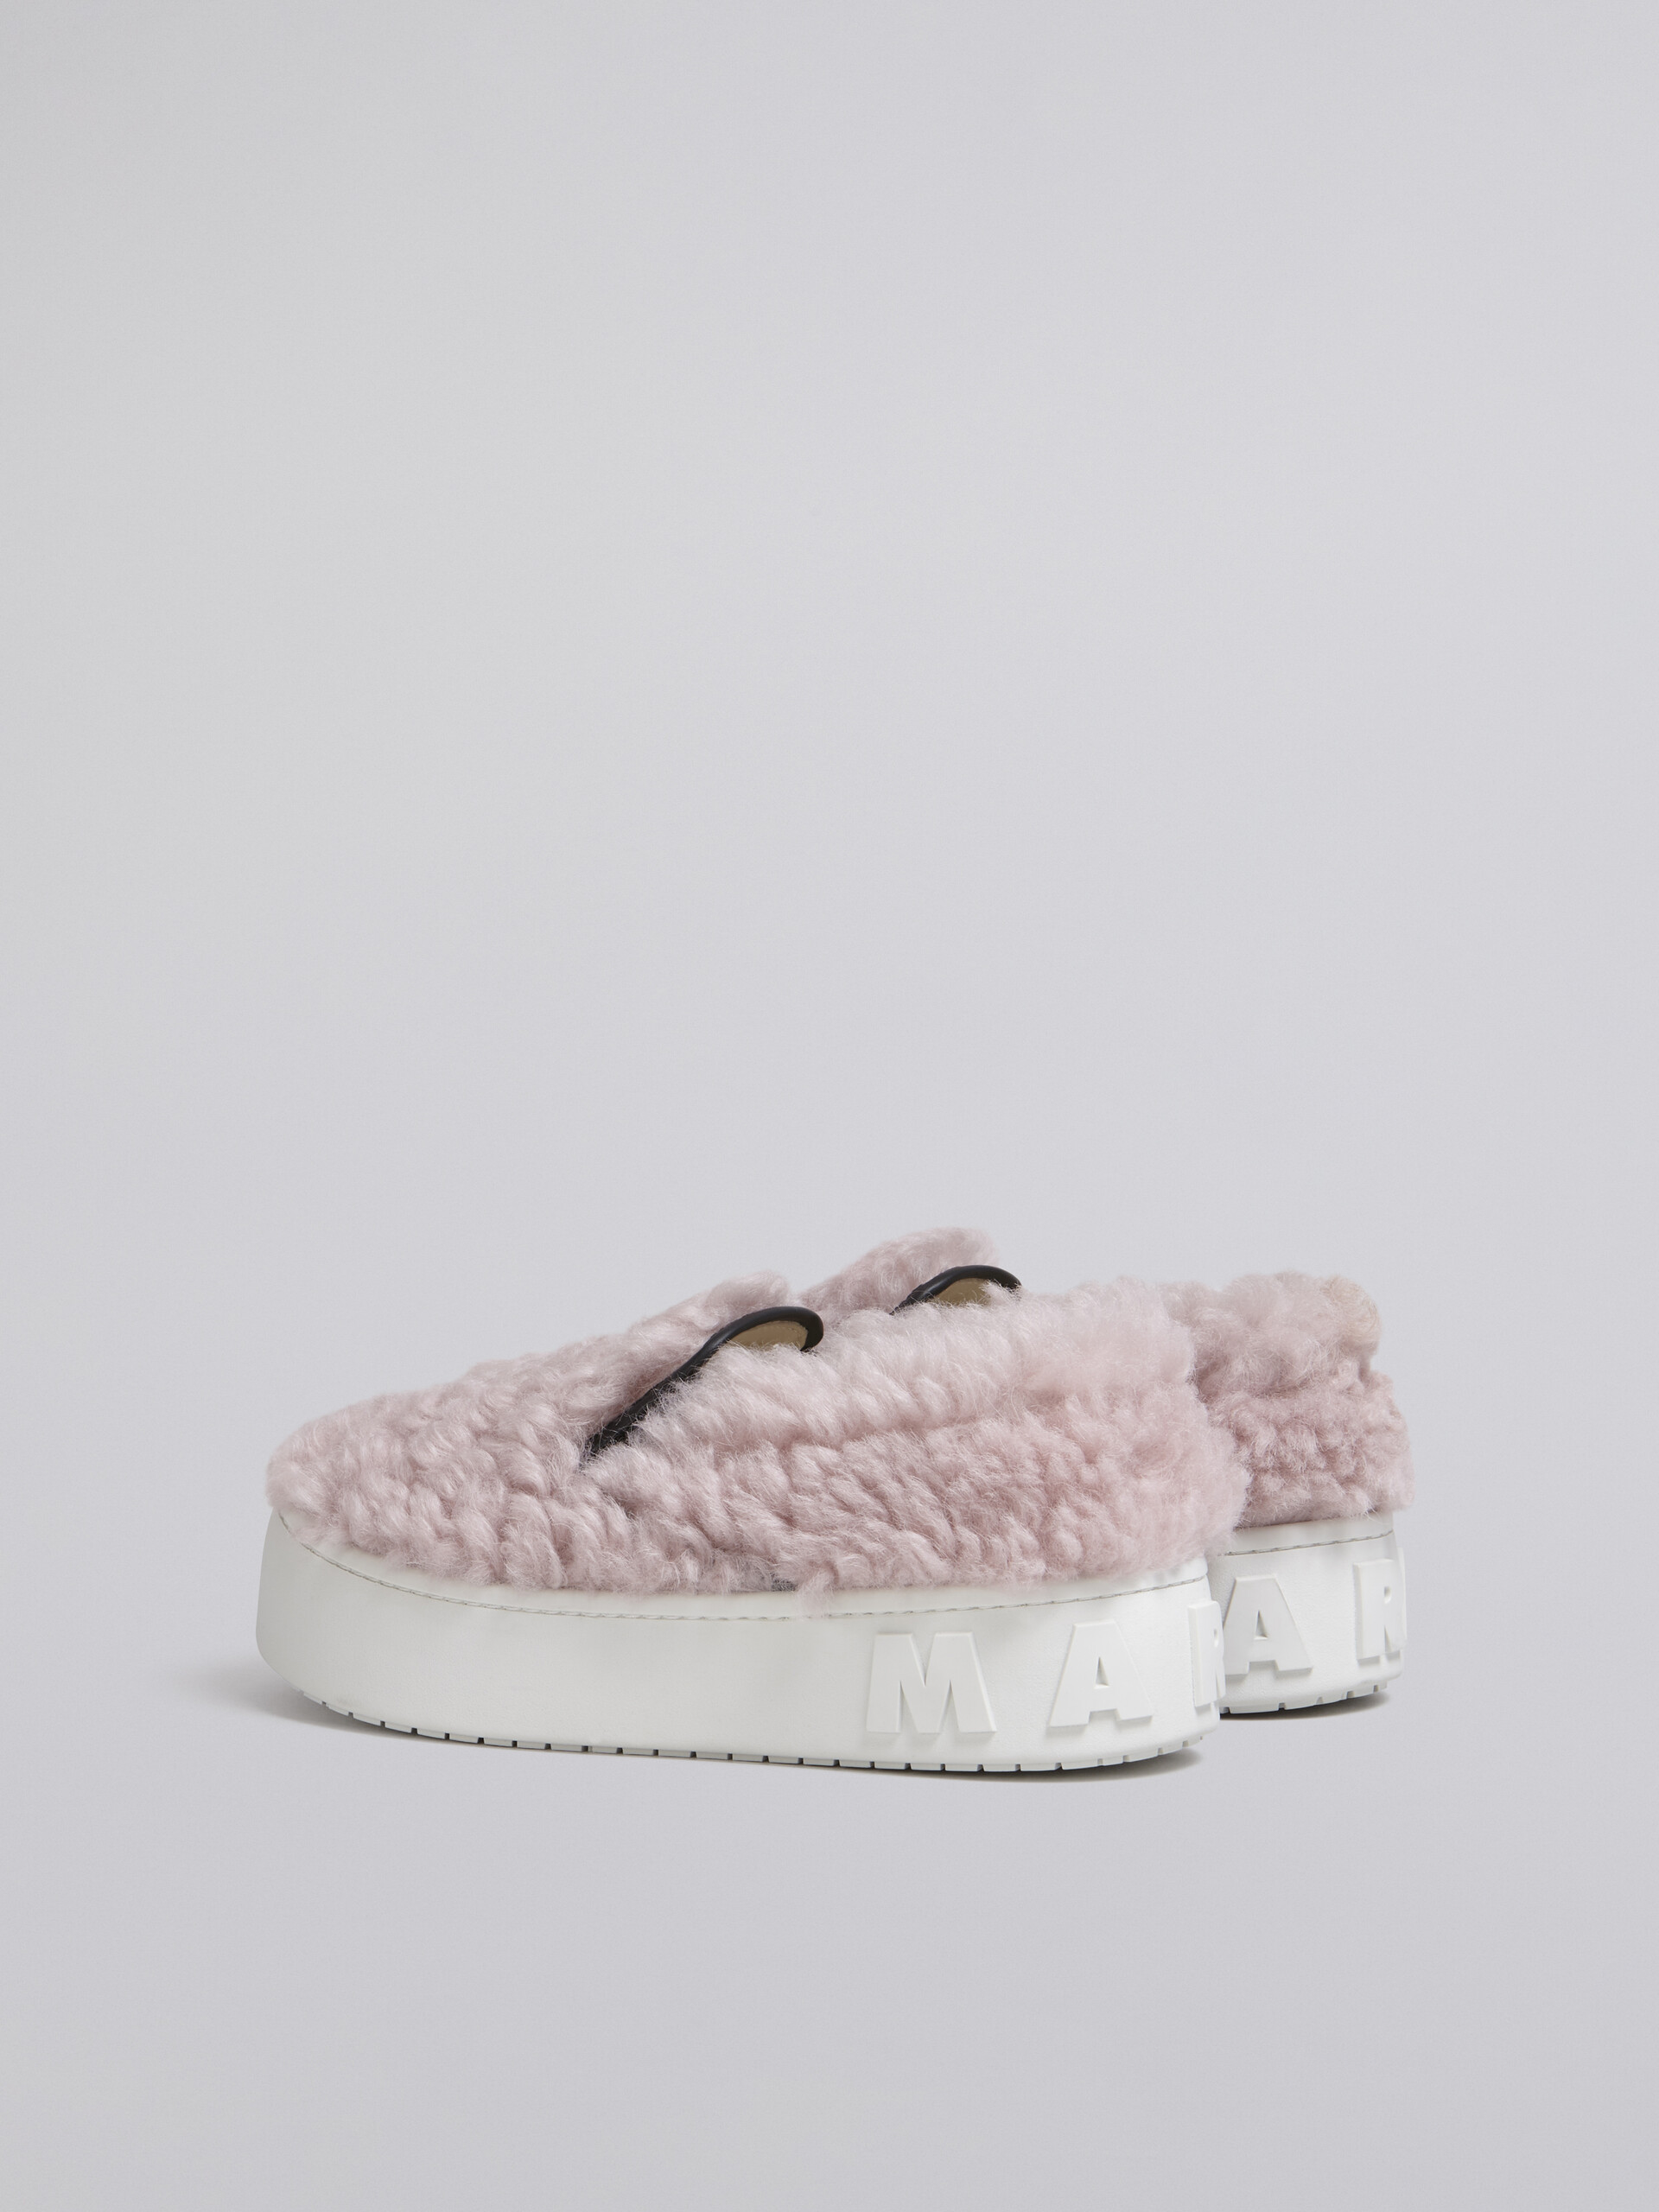 Light blue shearling slip-on sneaker with maxi Marni logo - Sneakers - Image 3